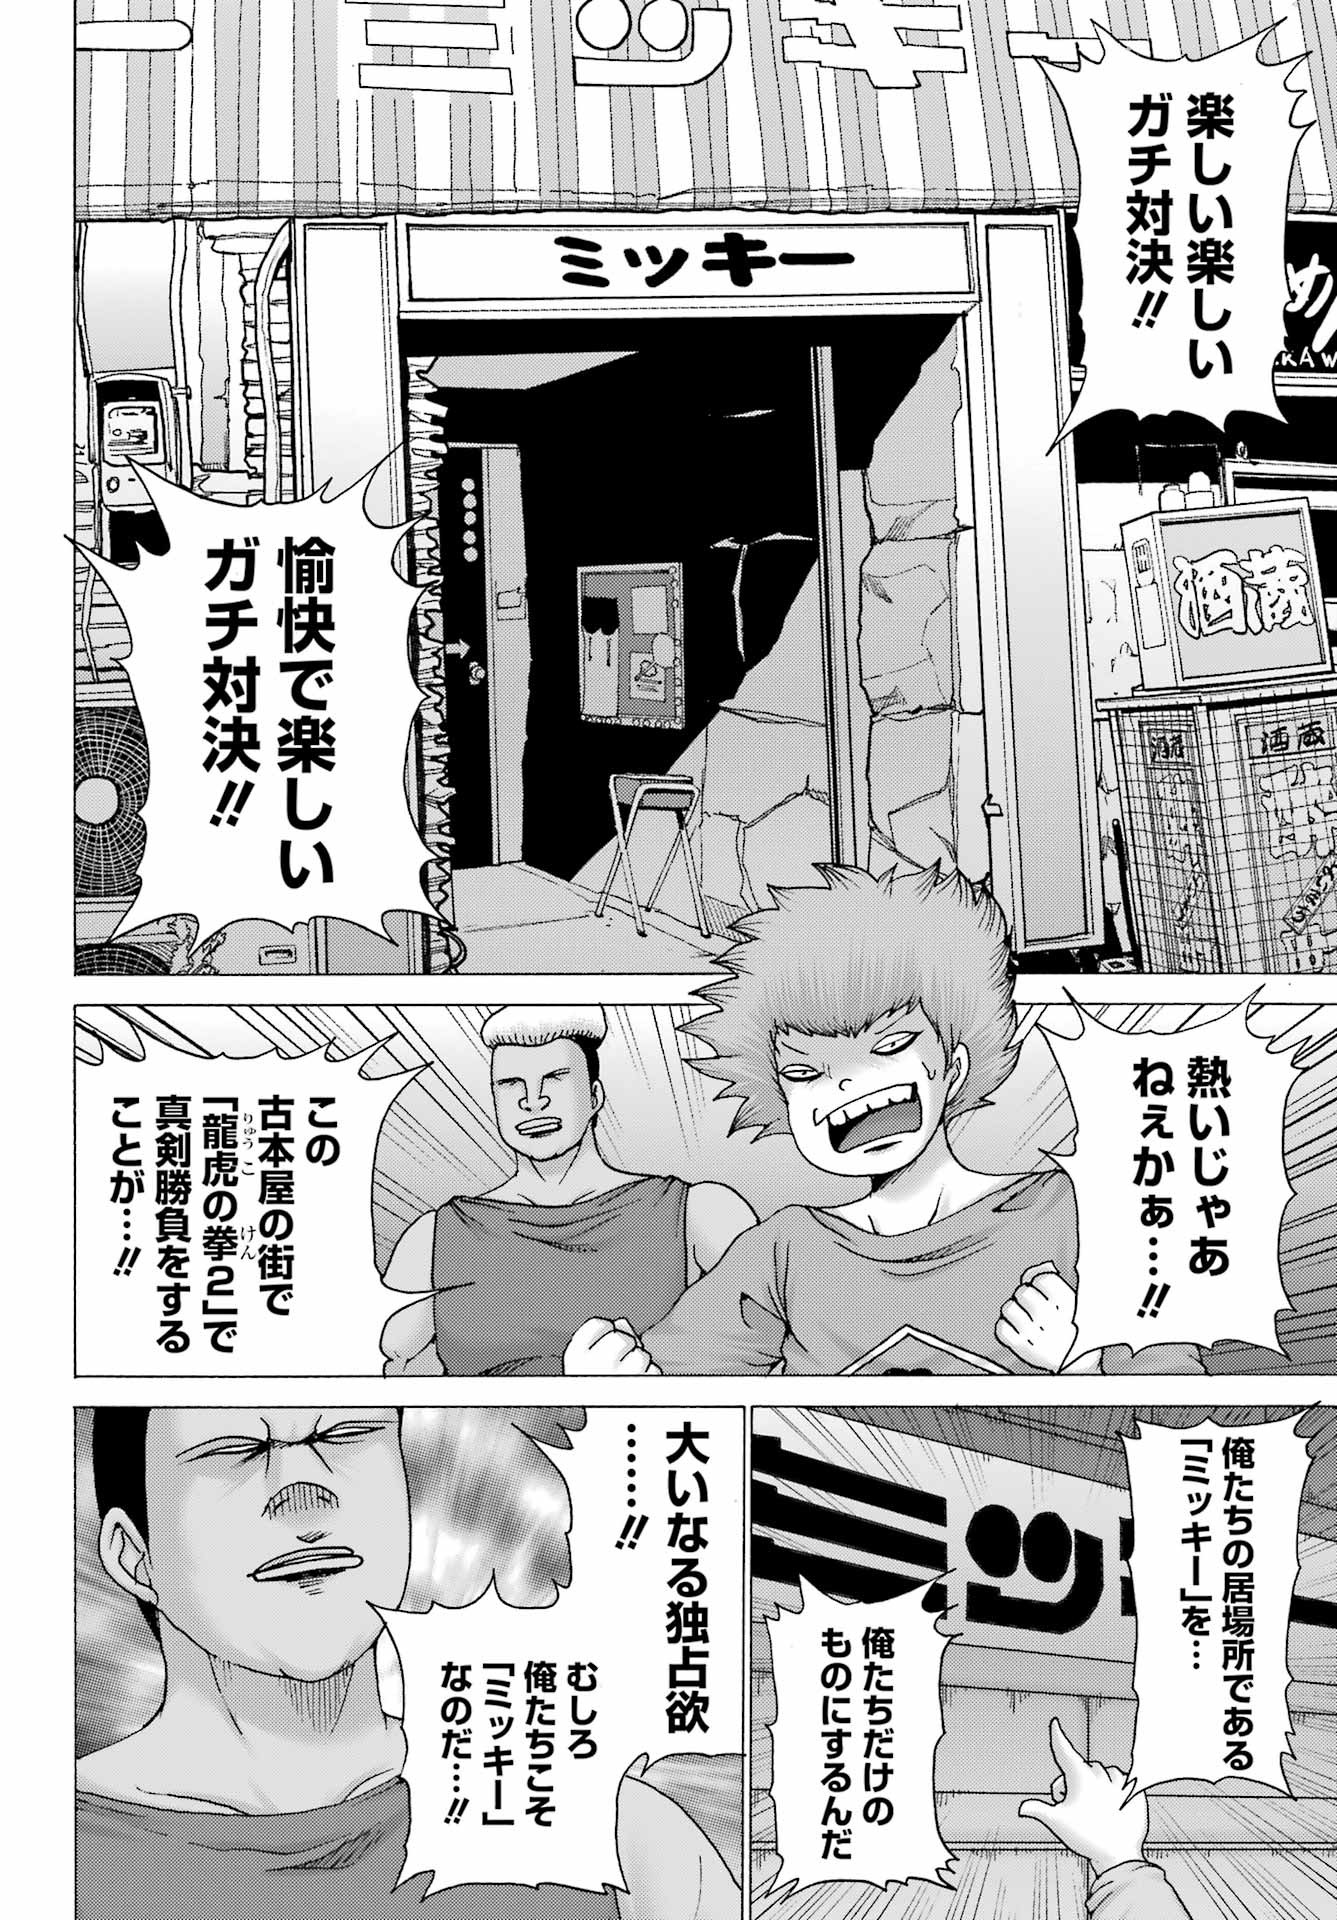 High Score Girl DASH - Chapter 29 - Page 2